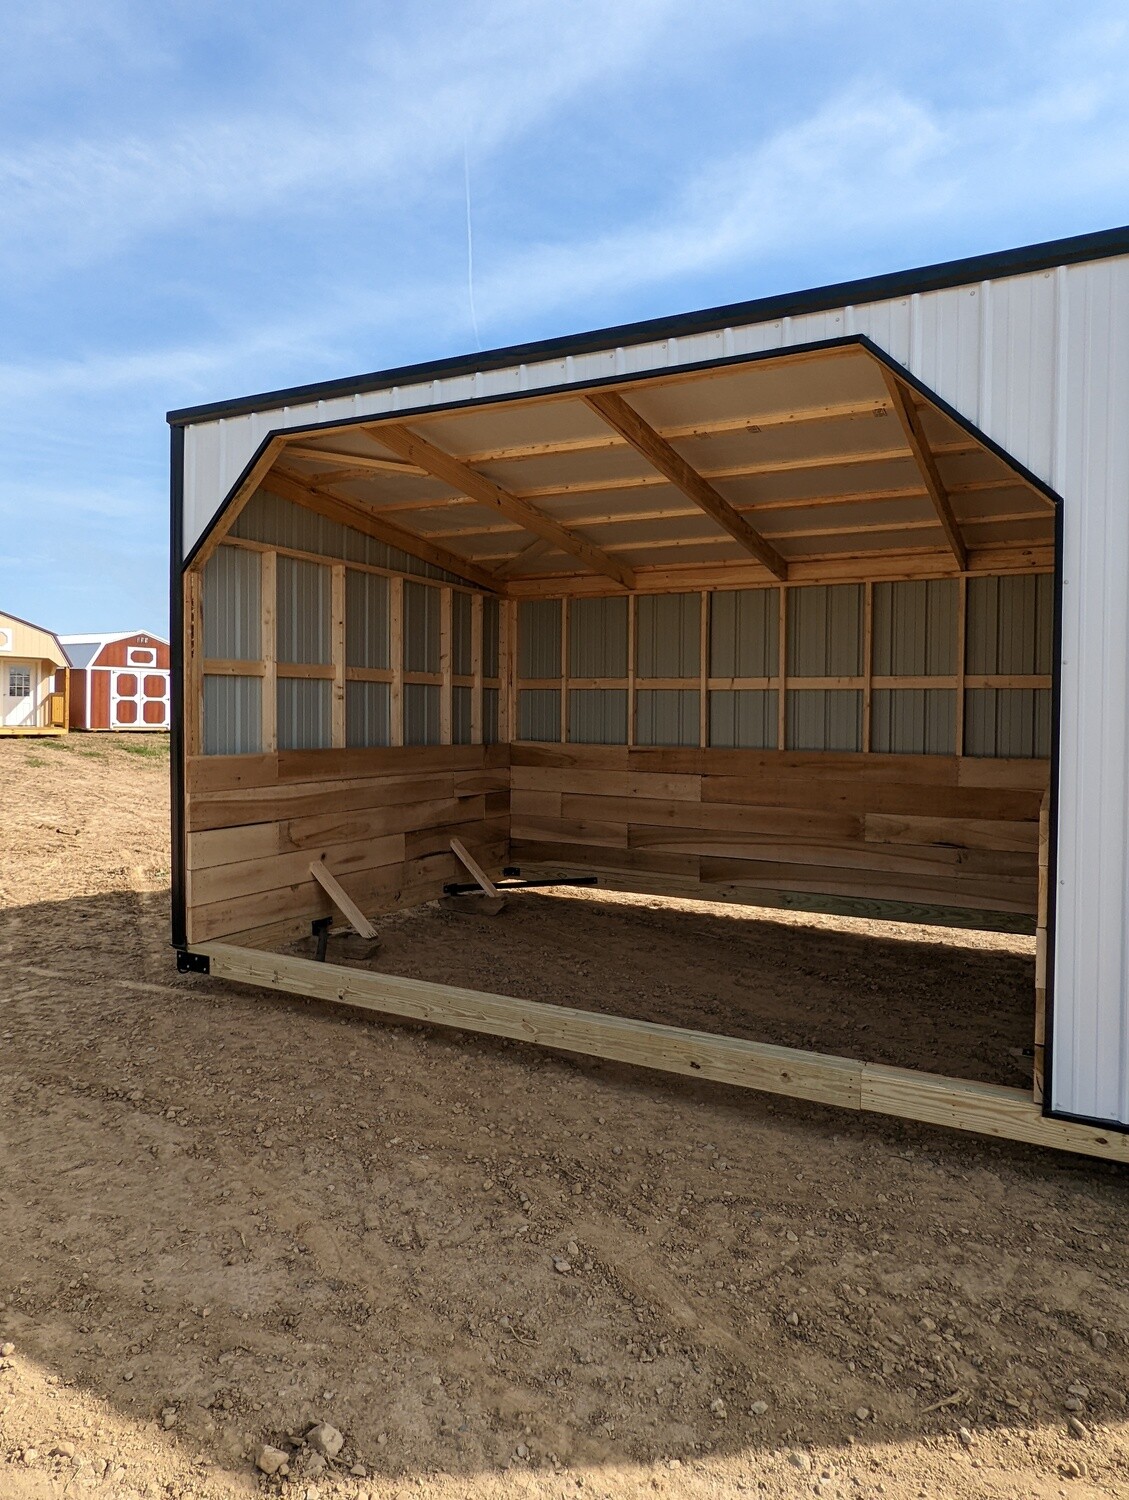 12' x 20' Horse Run-in Structures